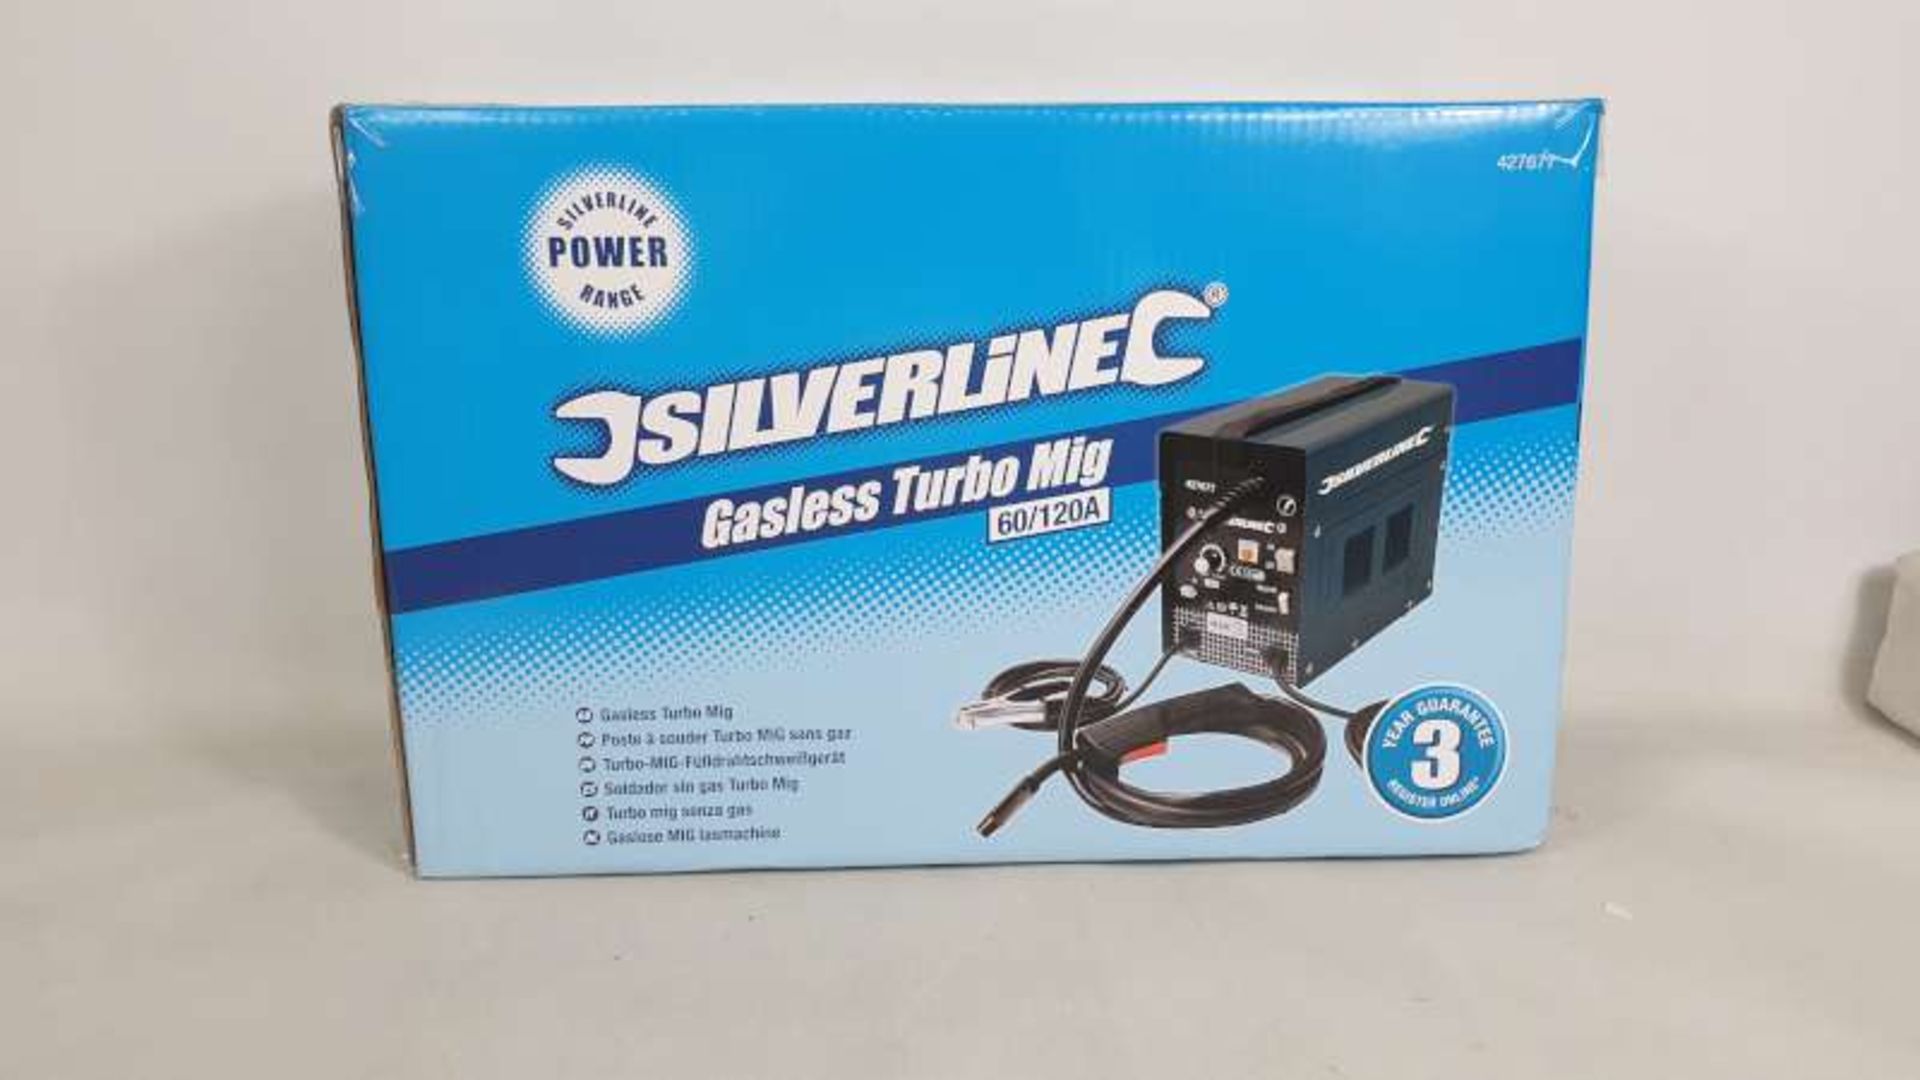 BRAND NEW BOXED SILVERLINE GASLESS TURBO MIG WELDER 60/120A WITH 3 YEAR GUARANTEE